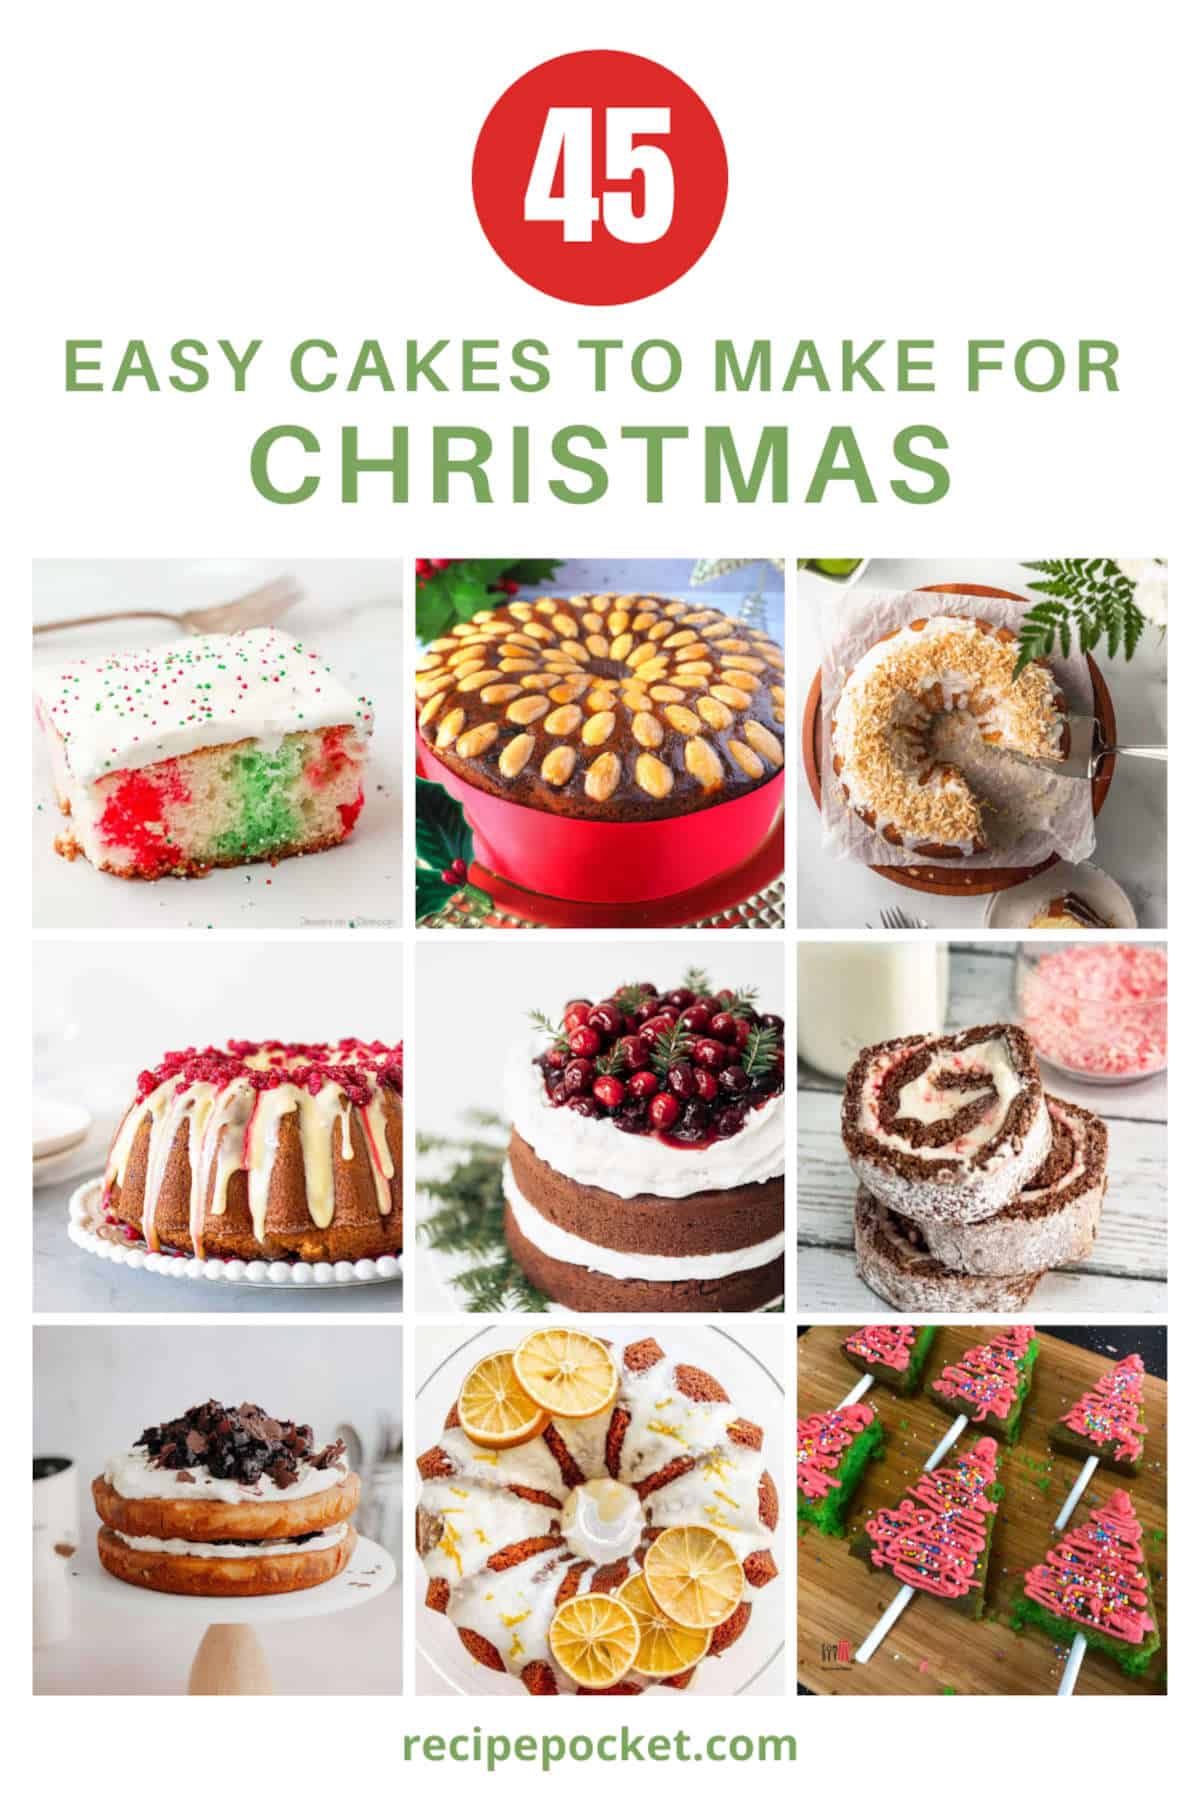 Collage of Cakes for article on easy Christmas cake recipes.